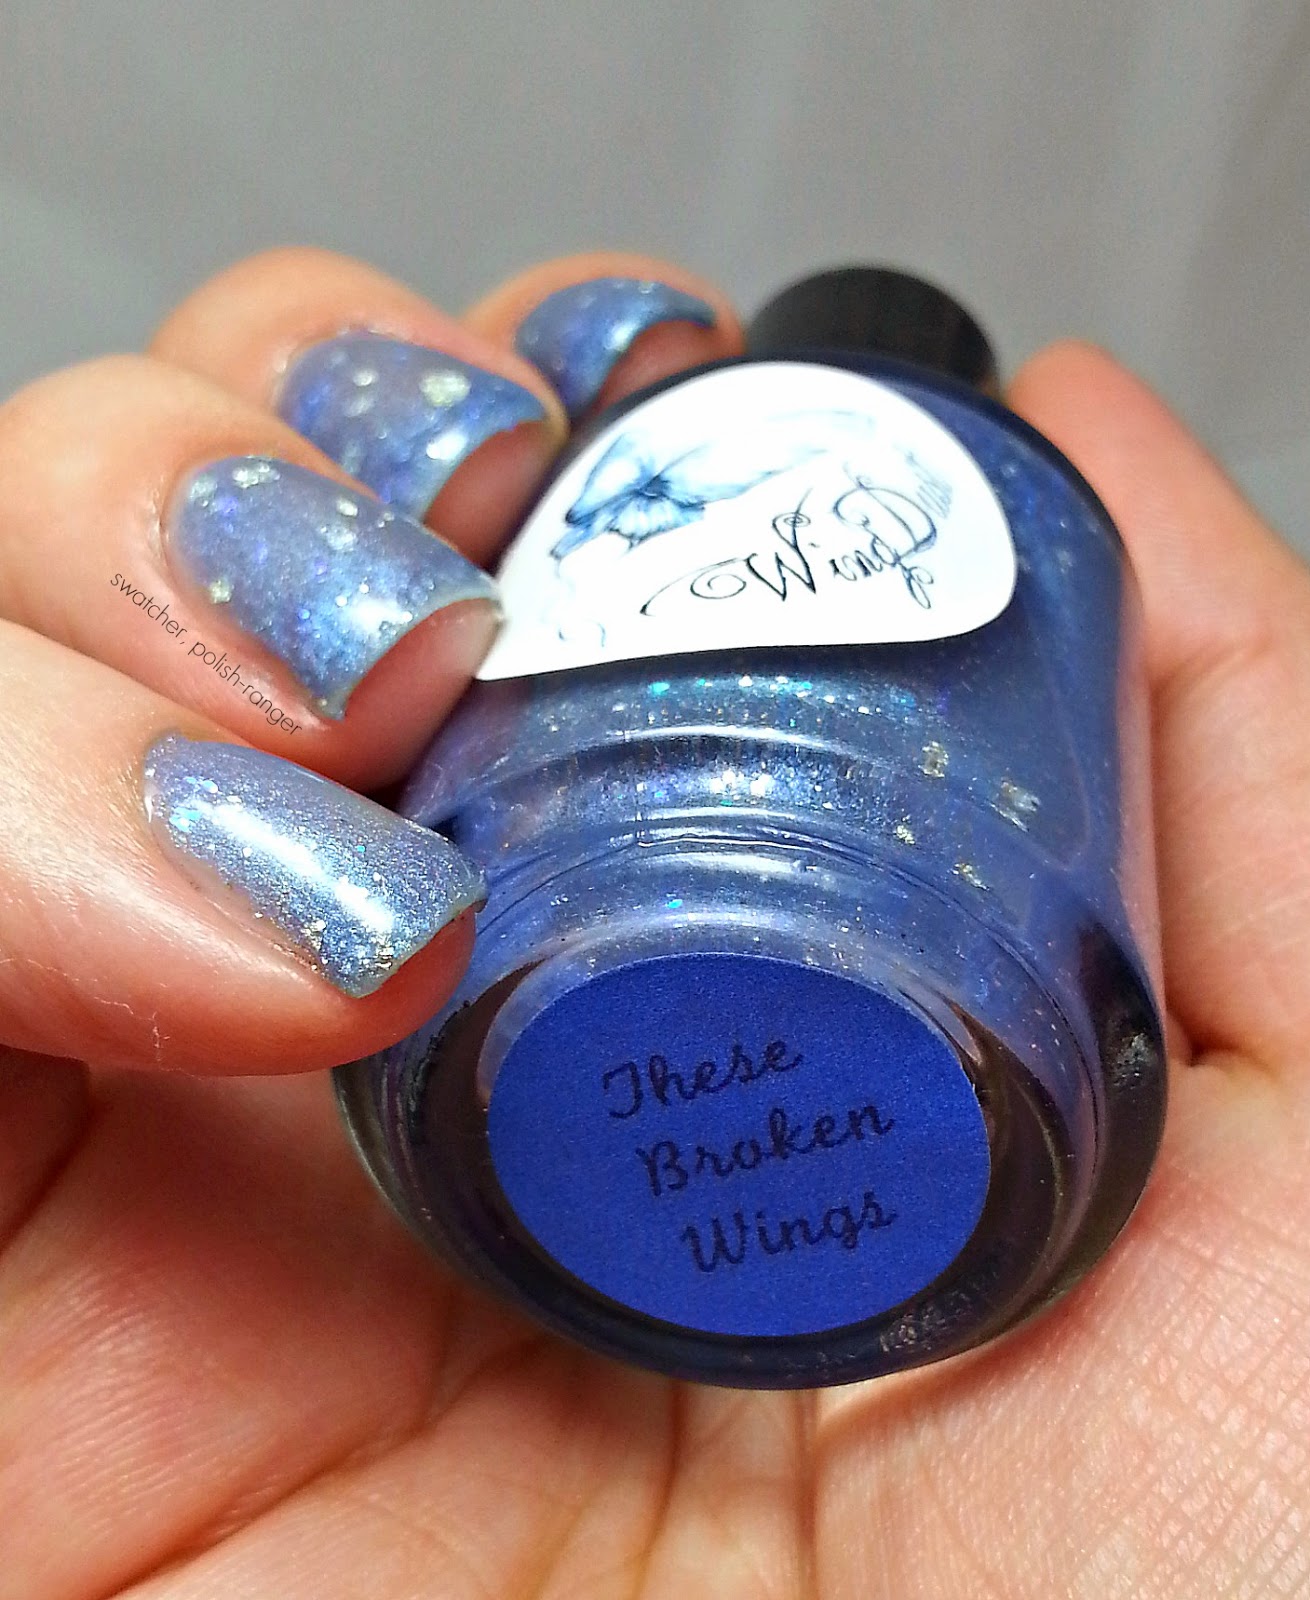 Wingdust Collections These Broken Wings swatch